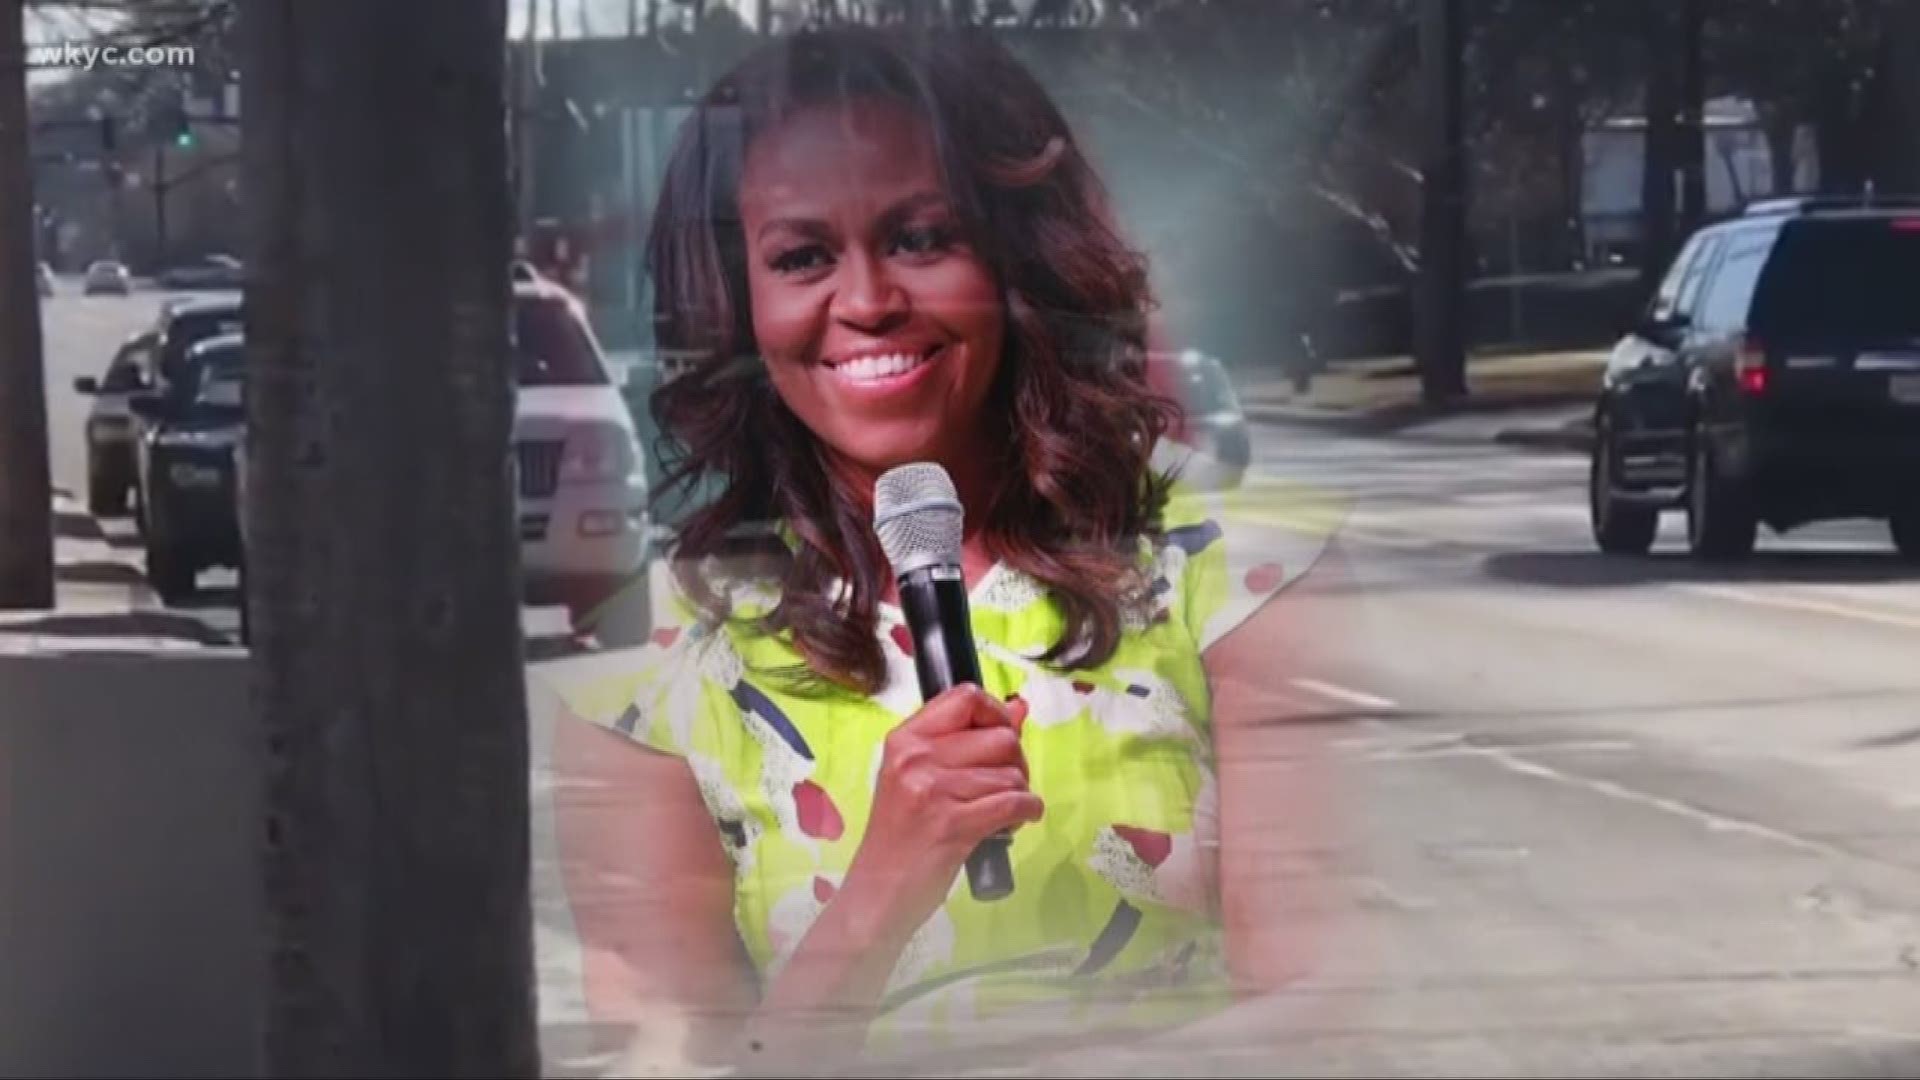 Michelle Obama stays awhile in CLE for surprise Church visit